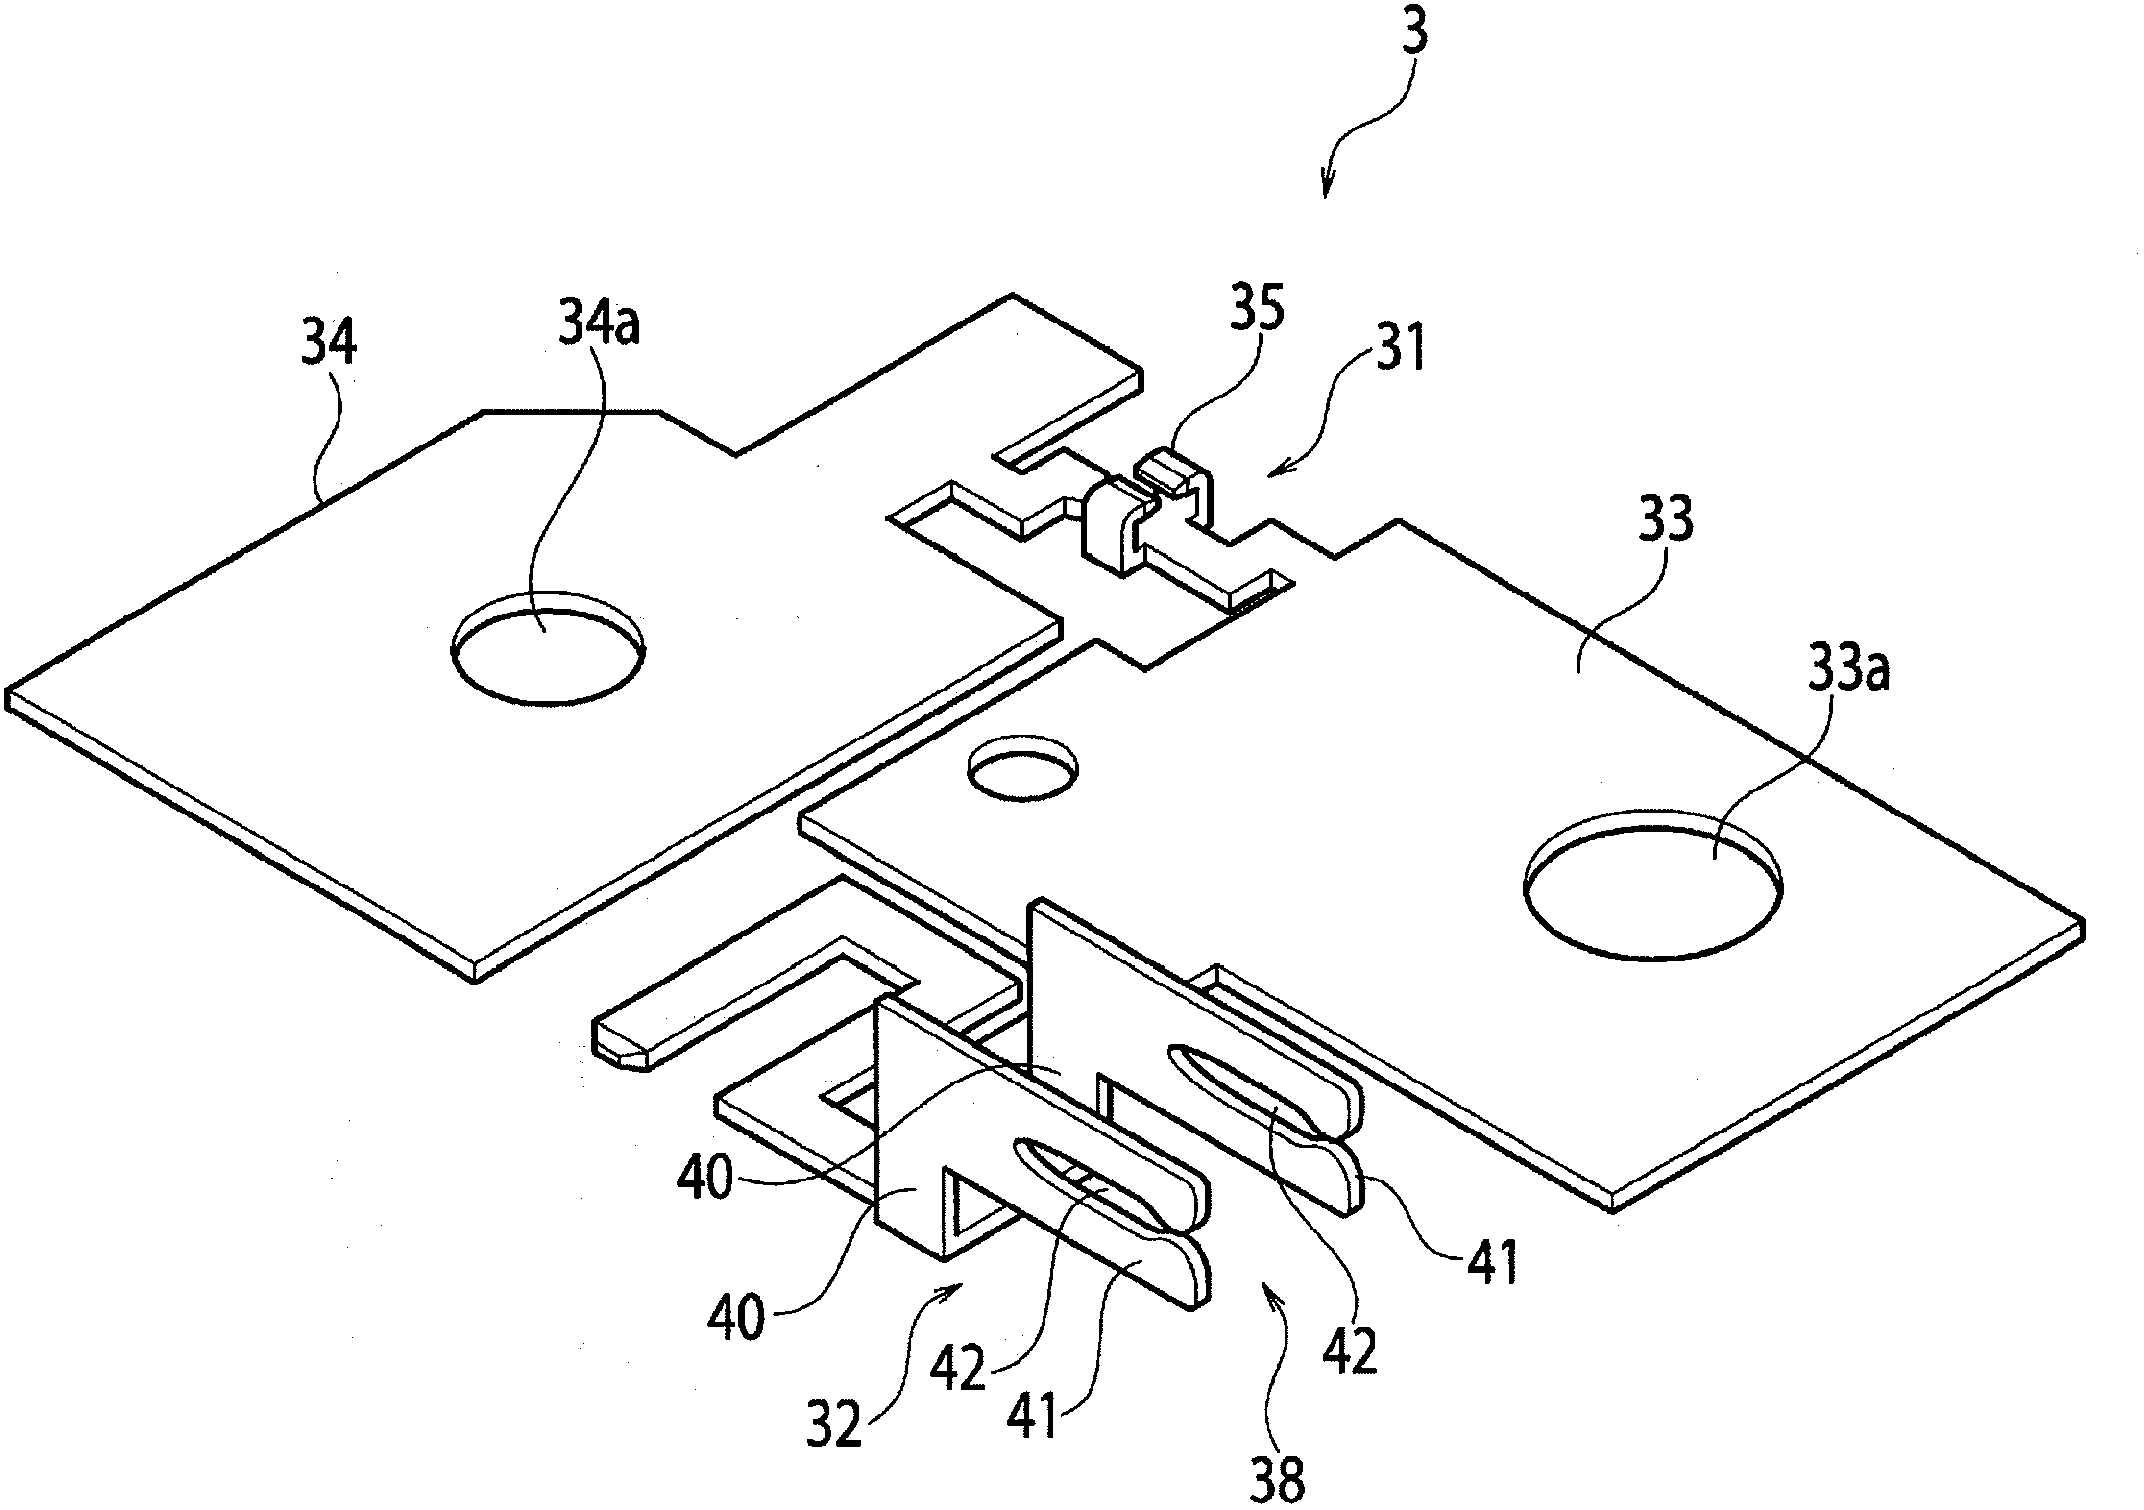 Fuse unit, mold structure, and molding method using mold structure